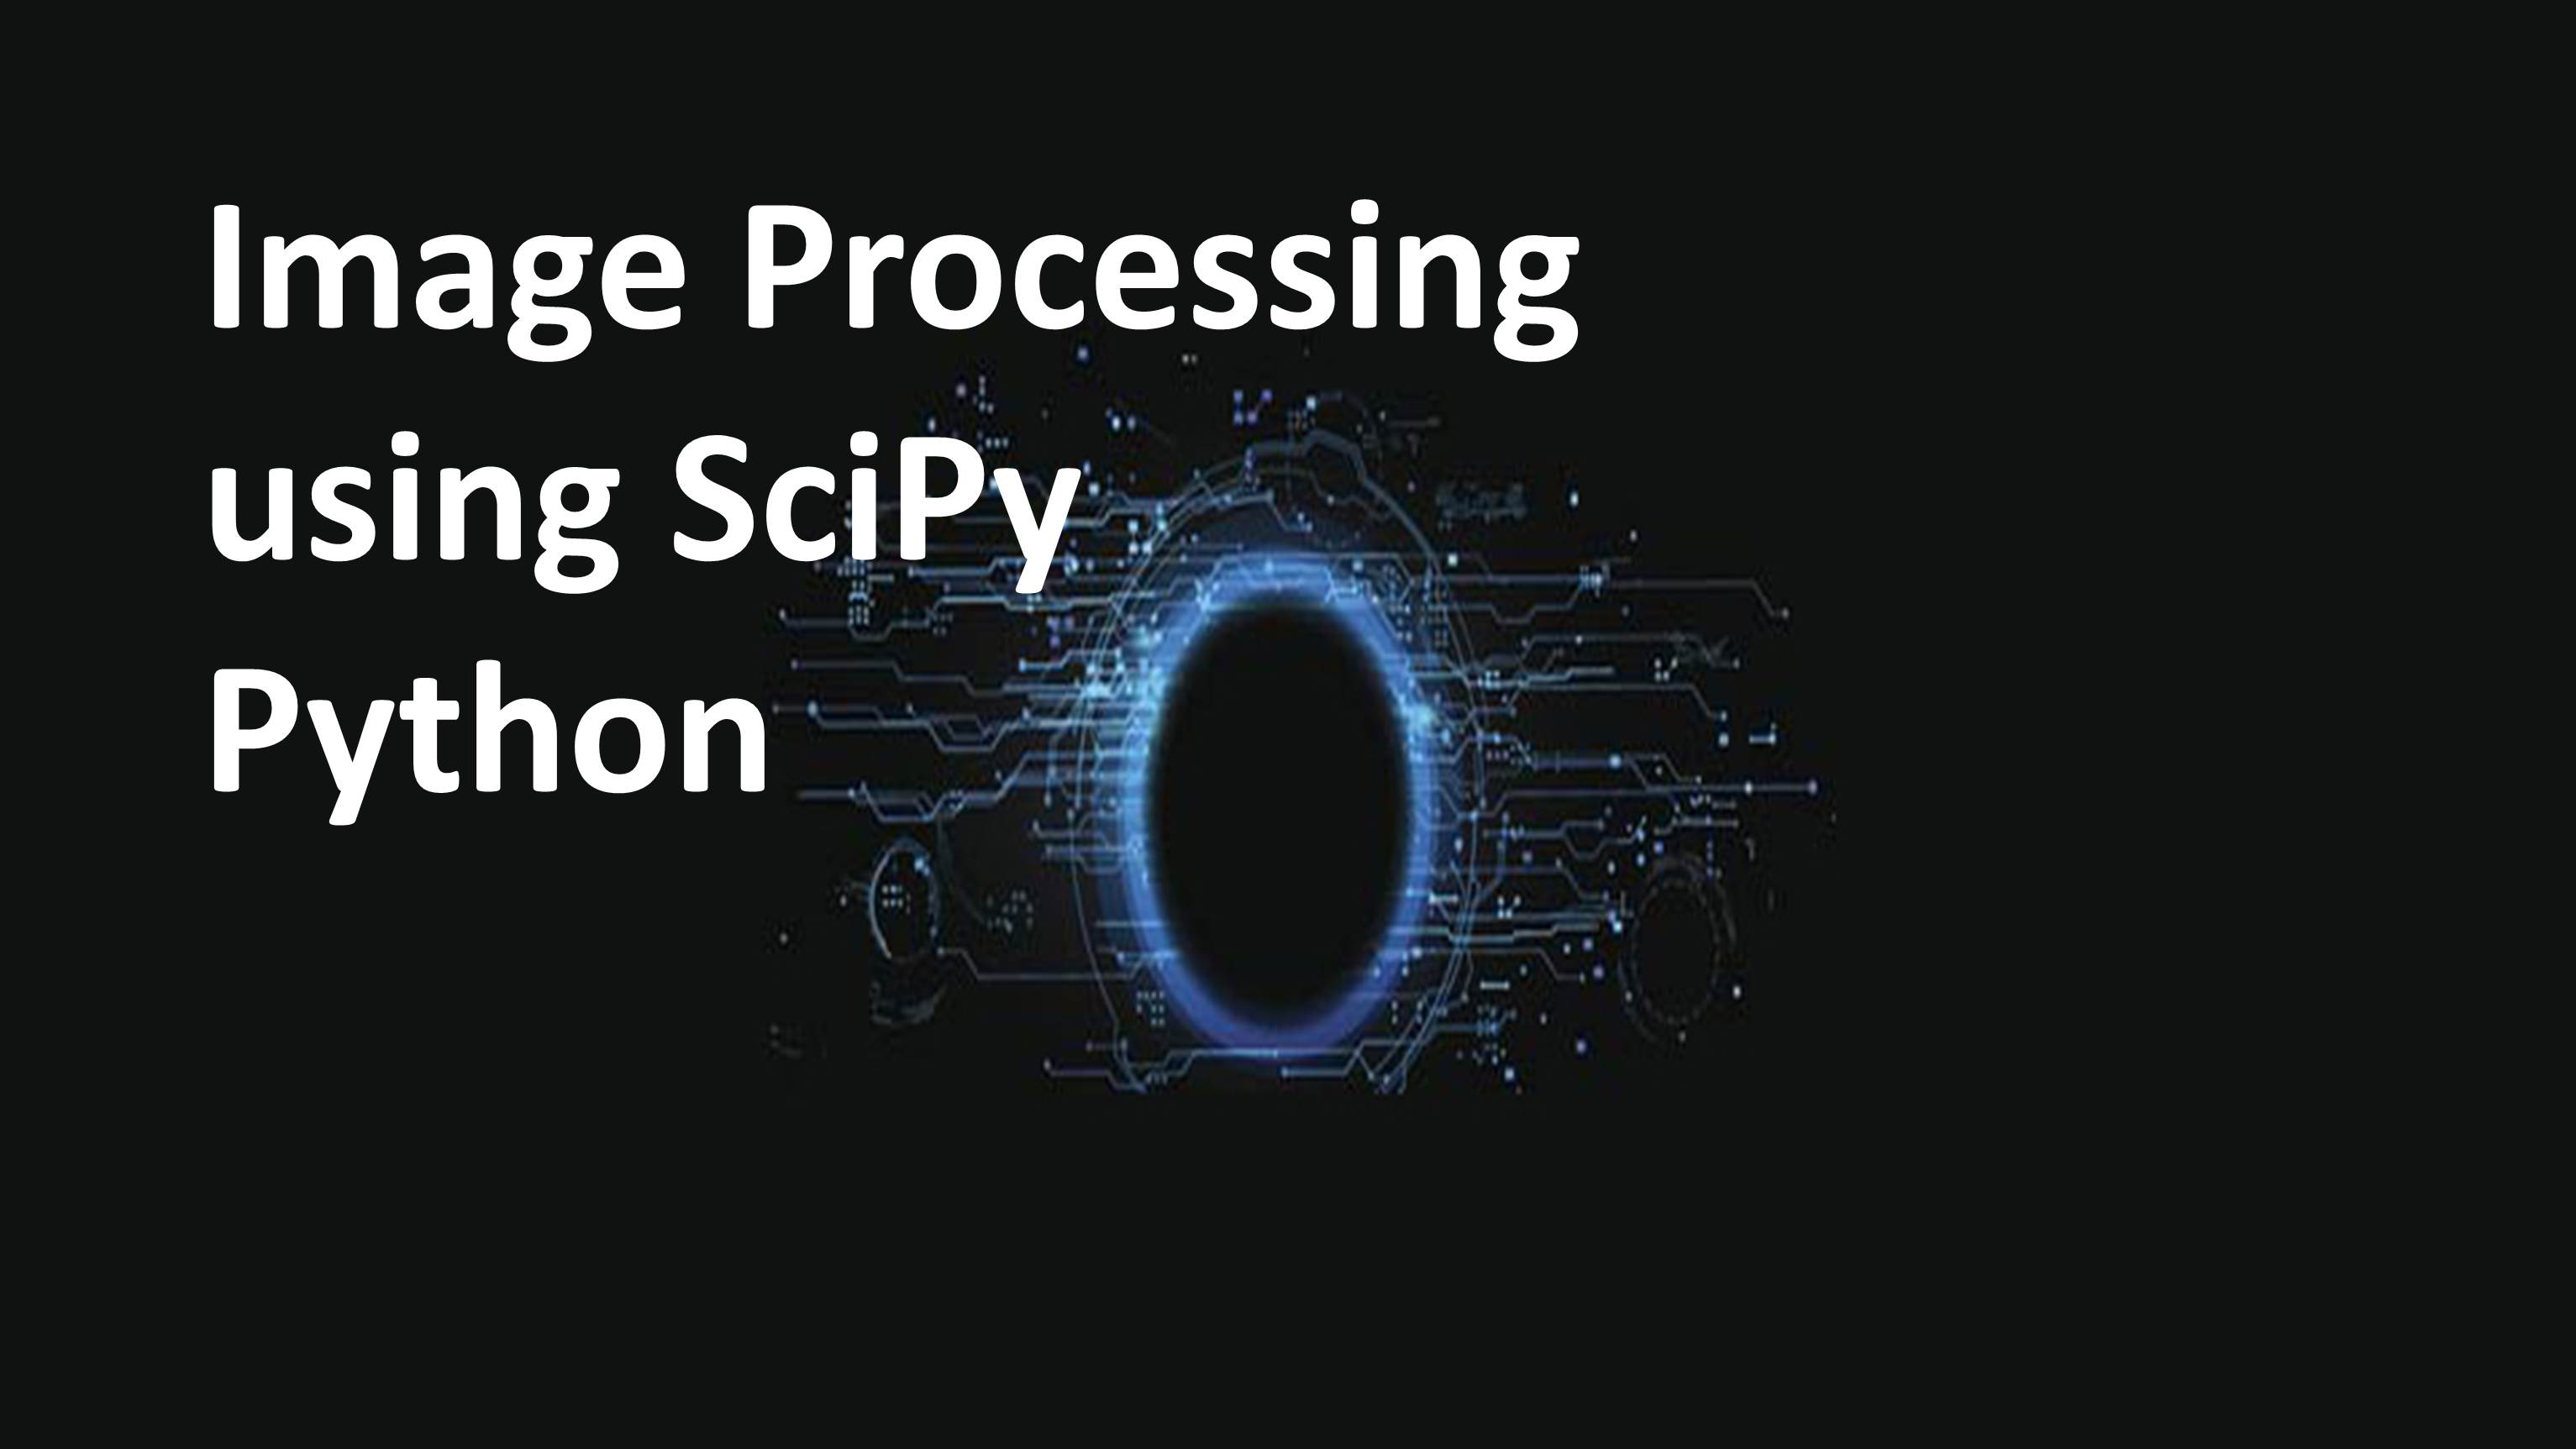 Image Processing using SciPy and Python